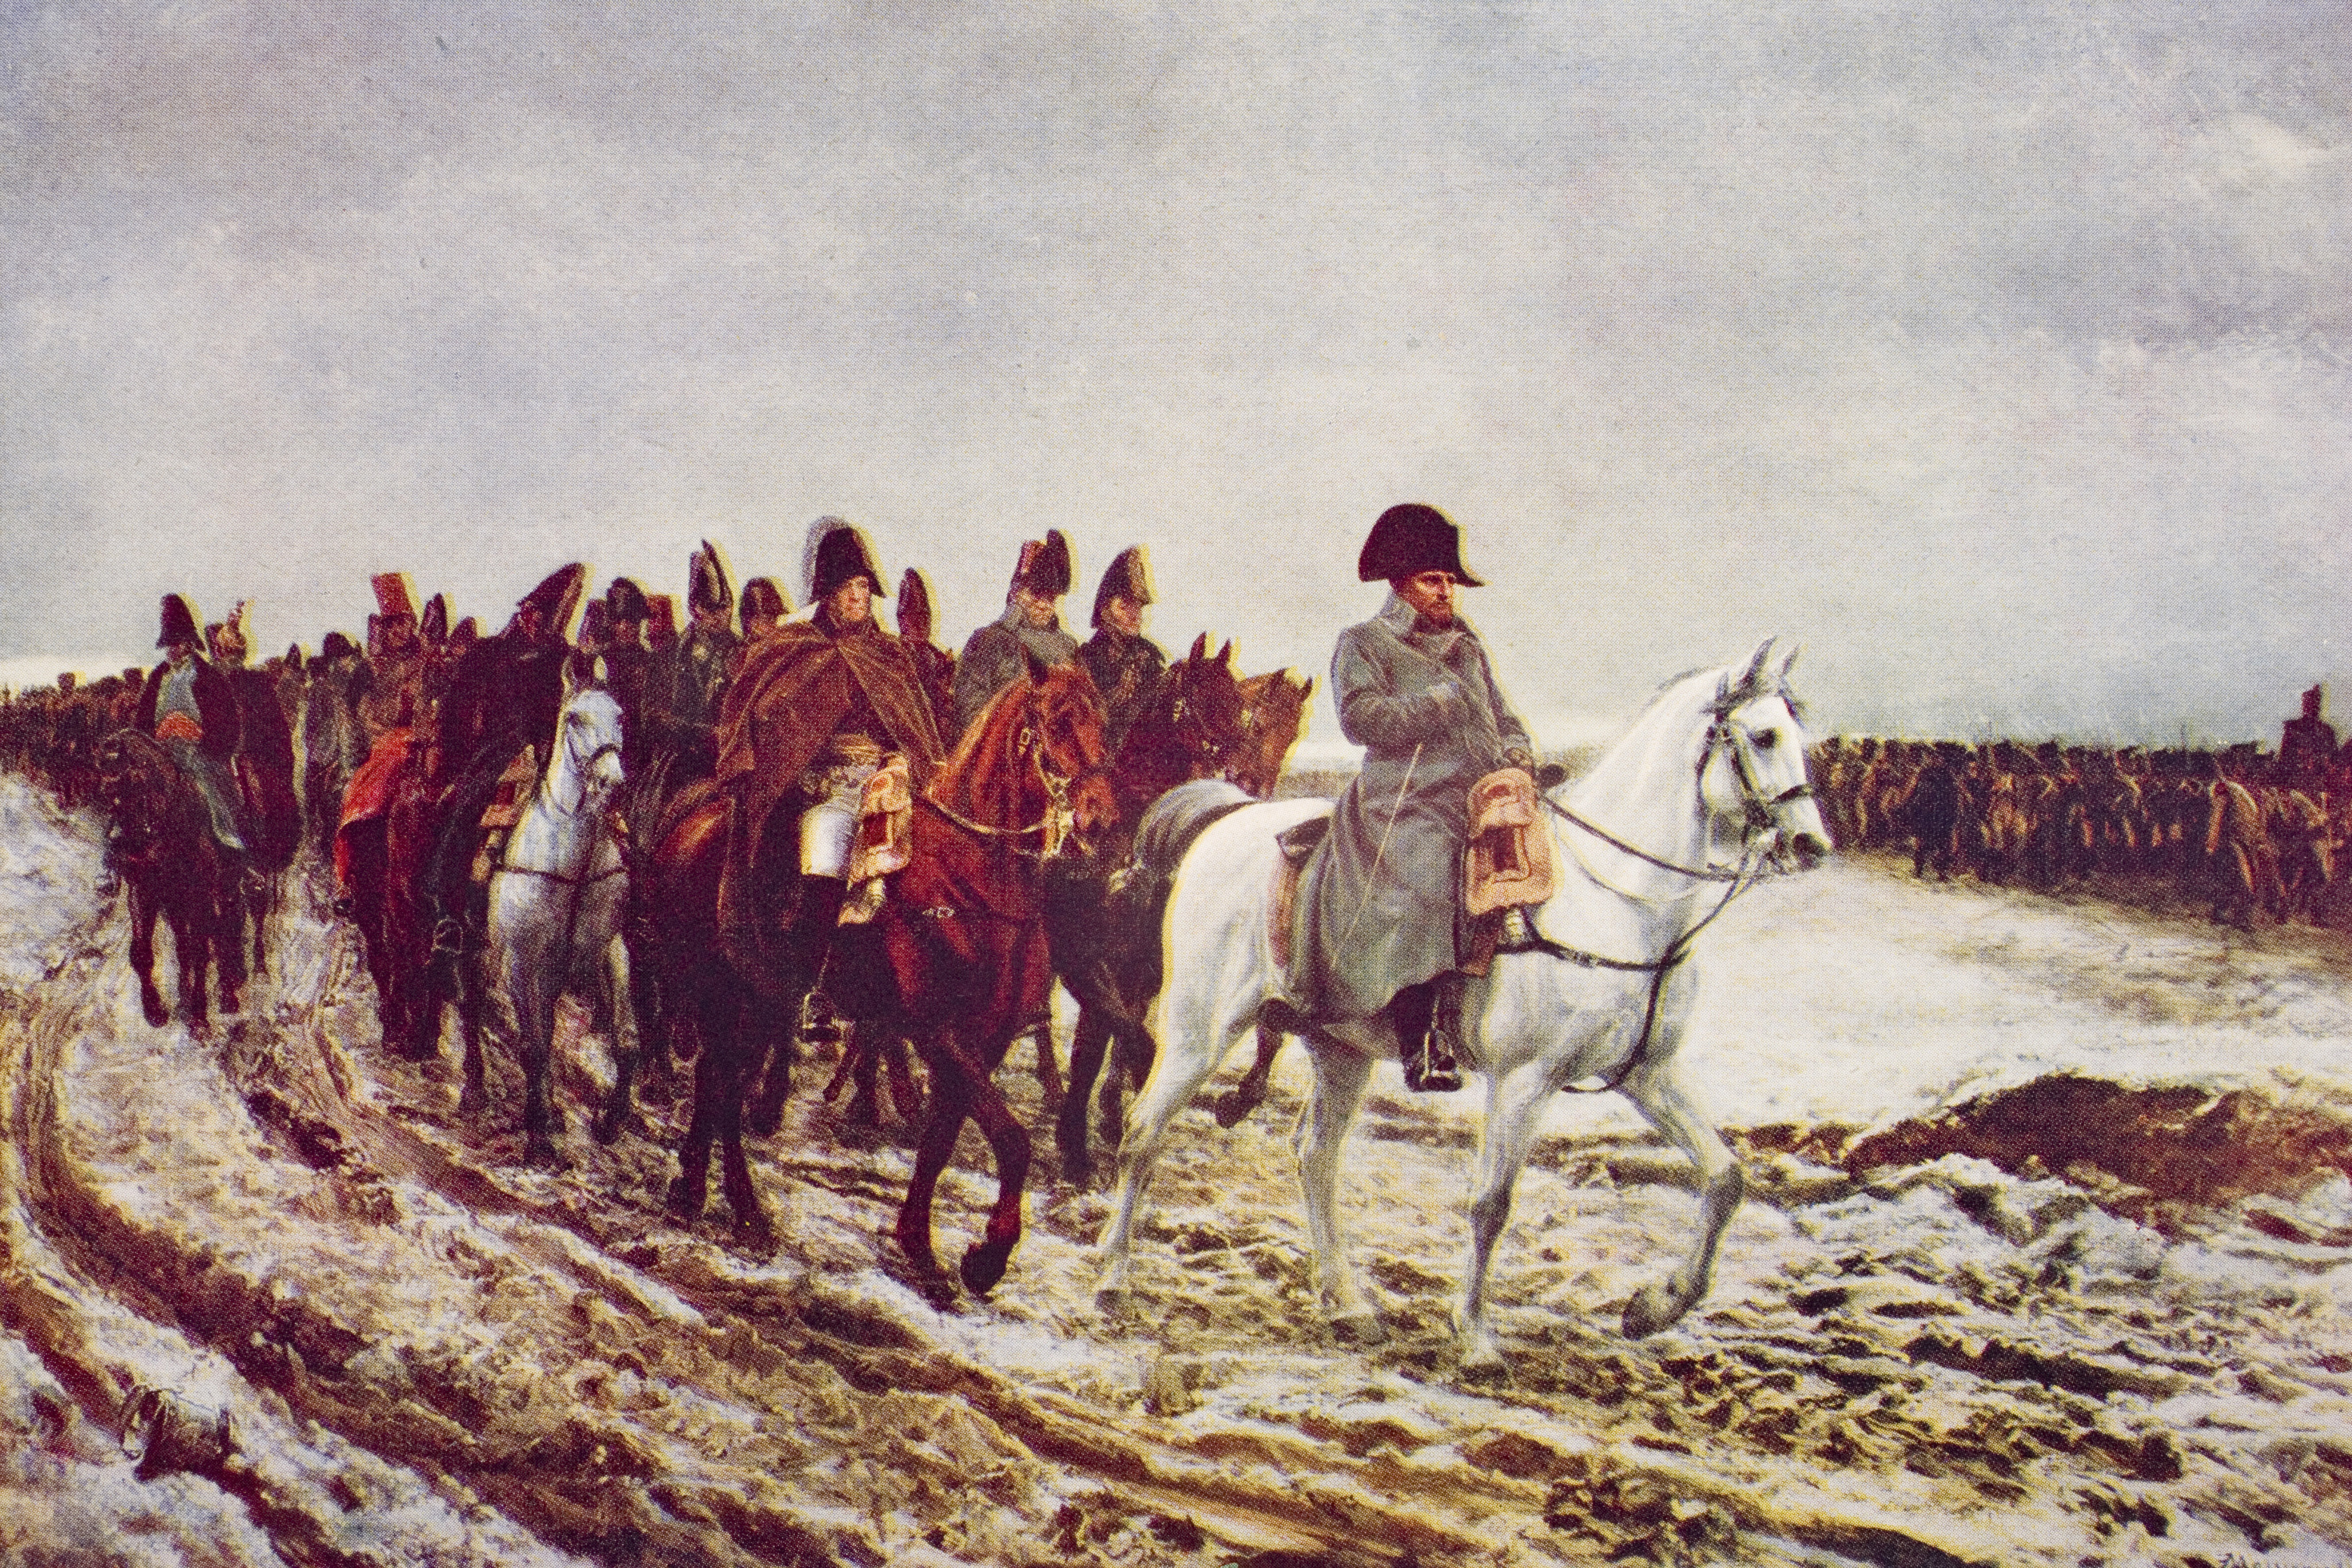 Napoleon S Retreat From Moscow Chart